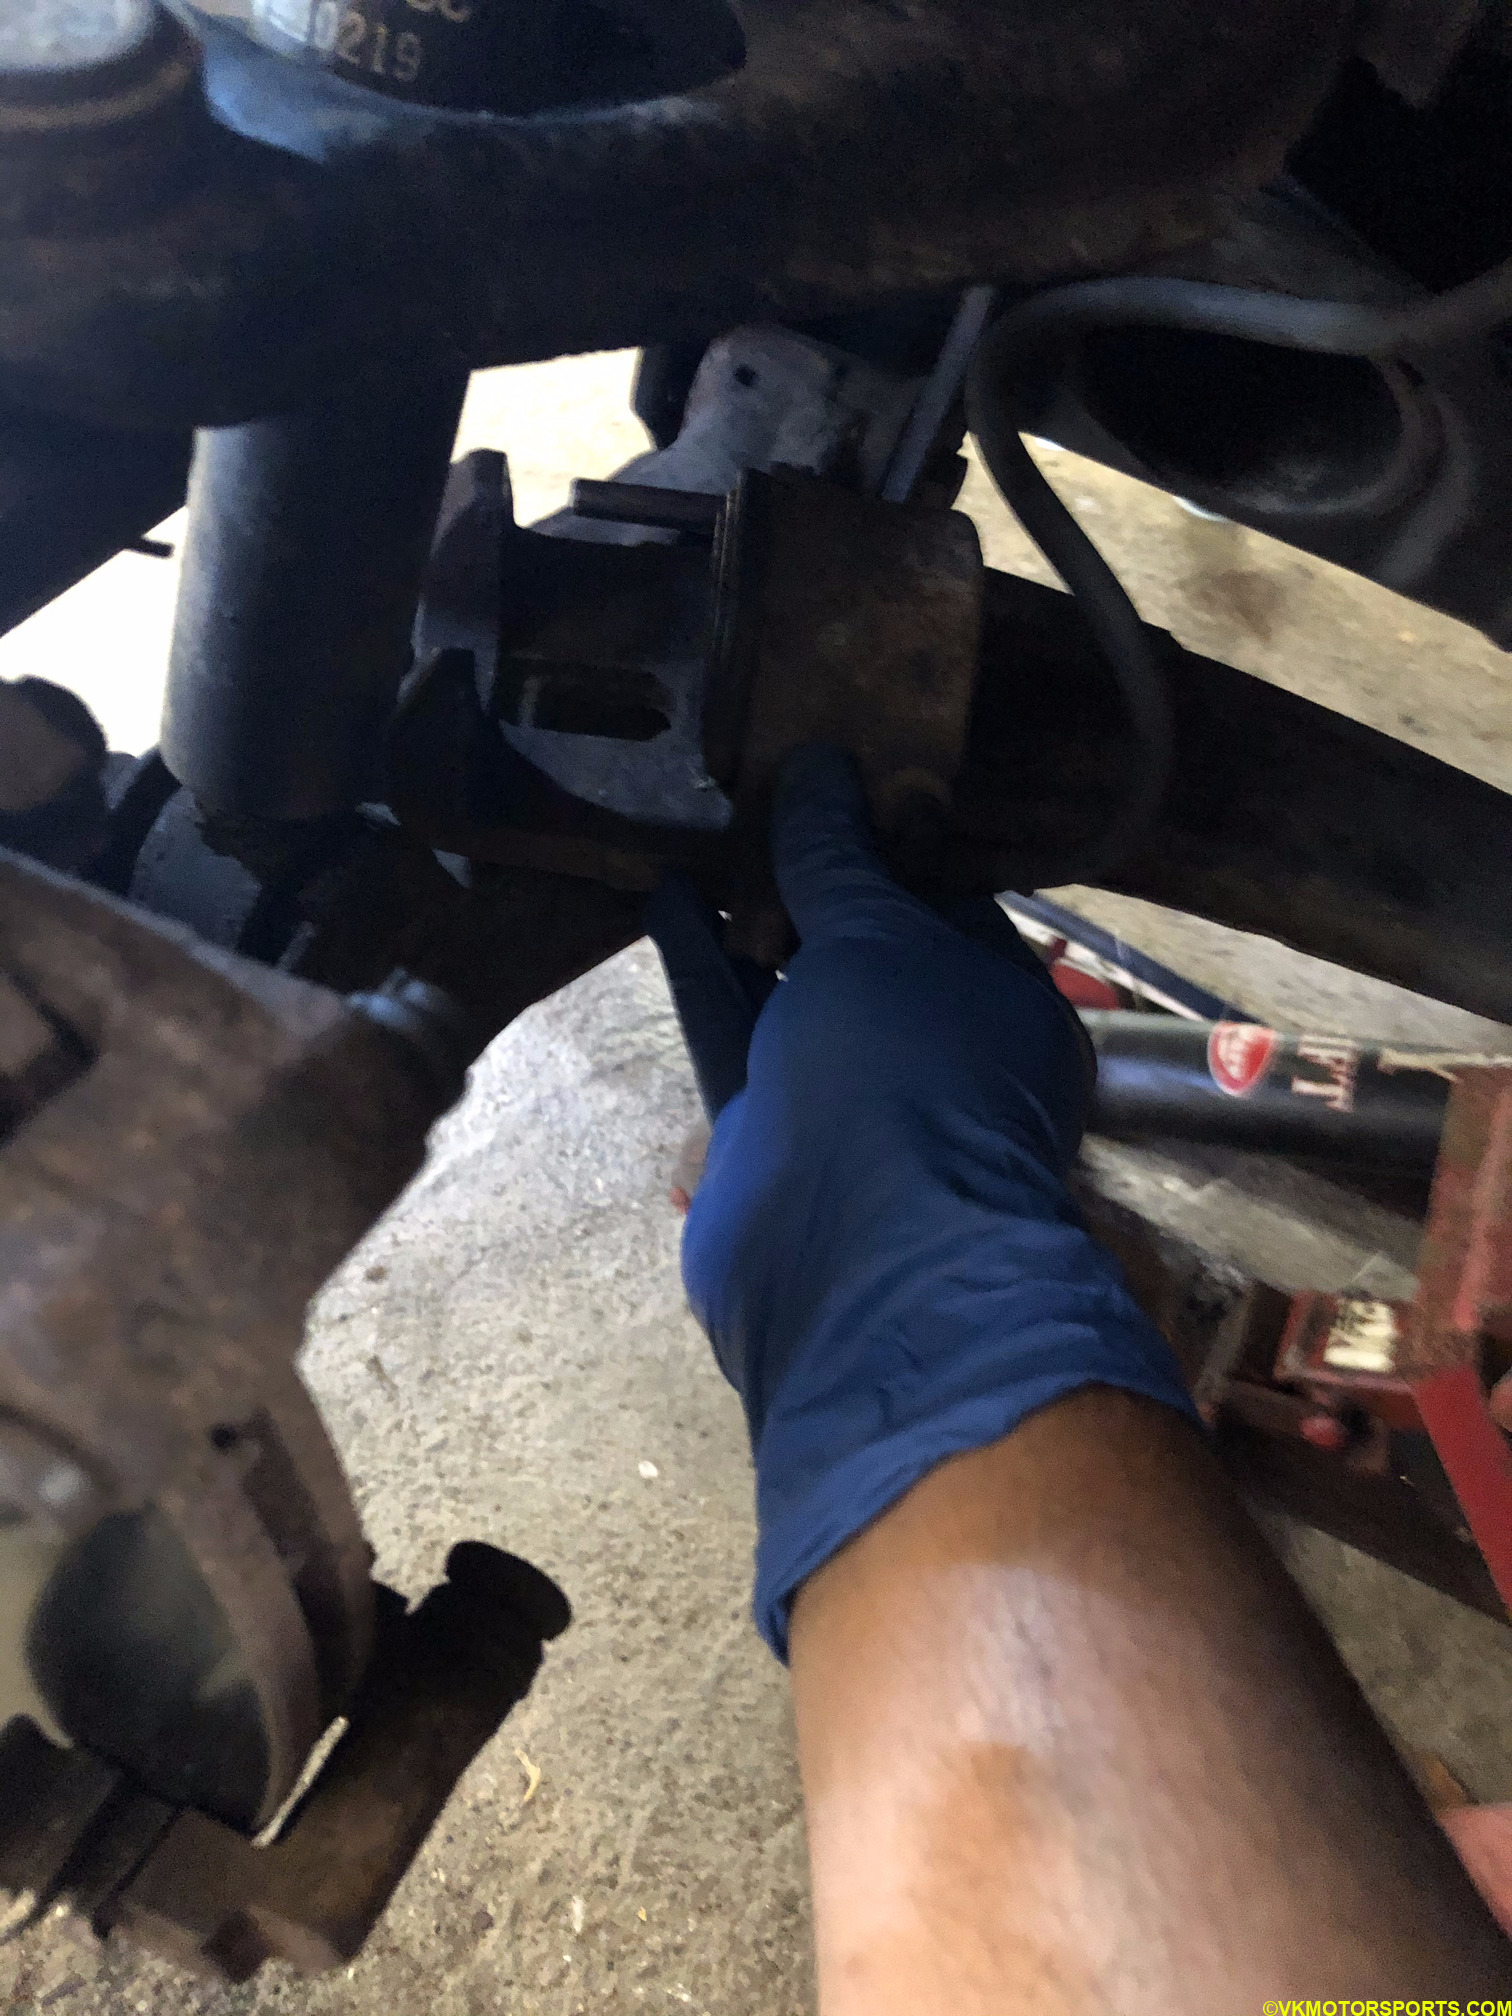 Place caliper safely on a control arm